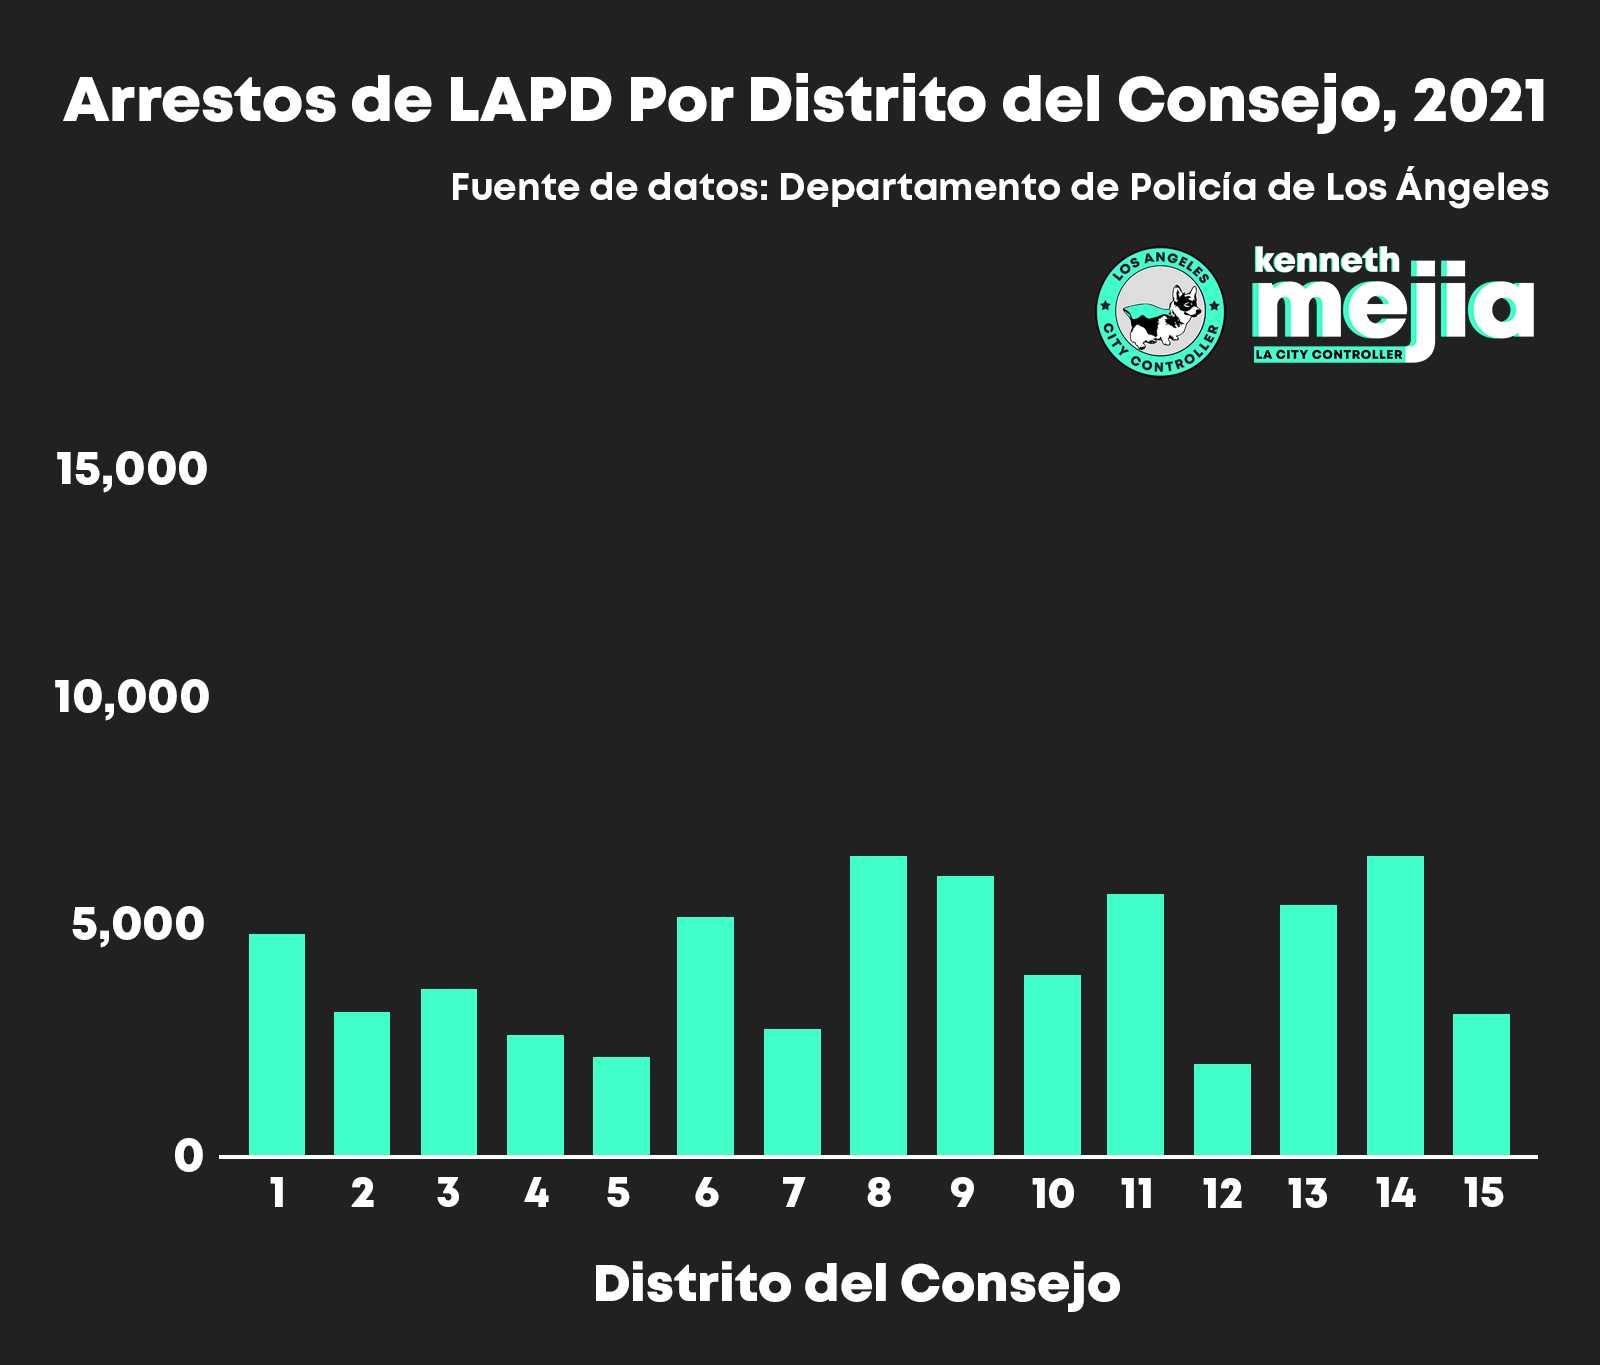 A bar chart of LAPD Arrests by Council District, 2021. There are still fewer arrests overall compared to 2019. There are 15 Council Districts. Council Districts  8 and 14 have the highest number of arrests, at around 6,000  arrests,  and are also fairly close in number of arrests to districts 9, and 11 which are also close to 6,000 arrests.  CDs 1, 6, and 13 each have around 5,000 arrests. The rest of the Council Districts havemuch fewer than 5,000  arrests. CDs 5 and 12 again have the fewest number of arrests, at under 2,500 arrests each. Source of data is LAPD.